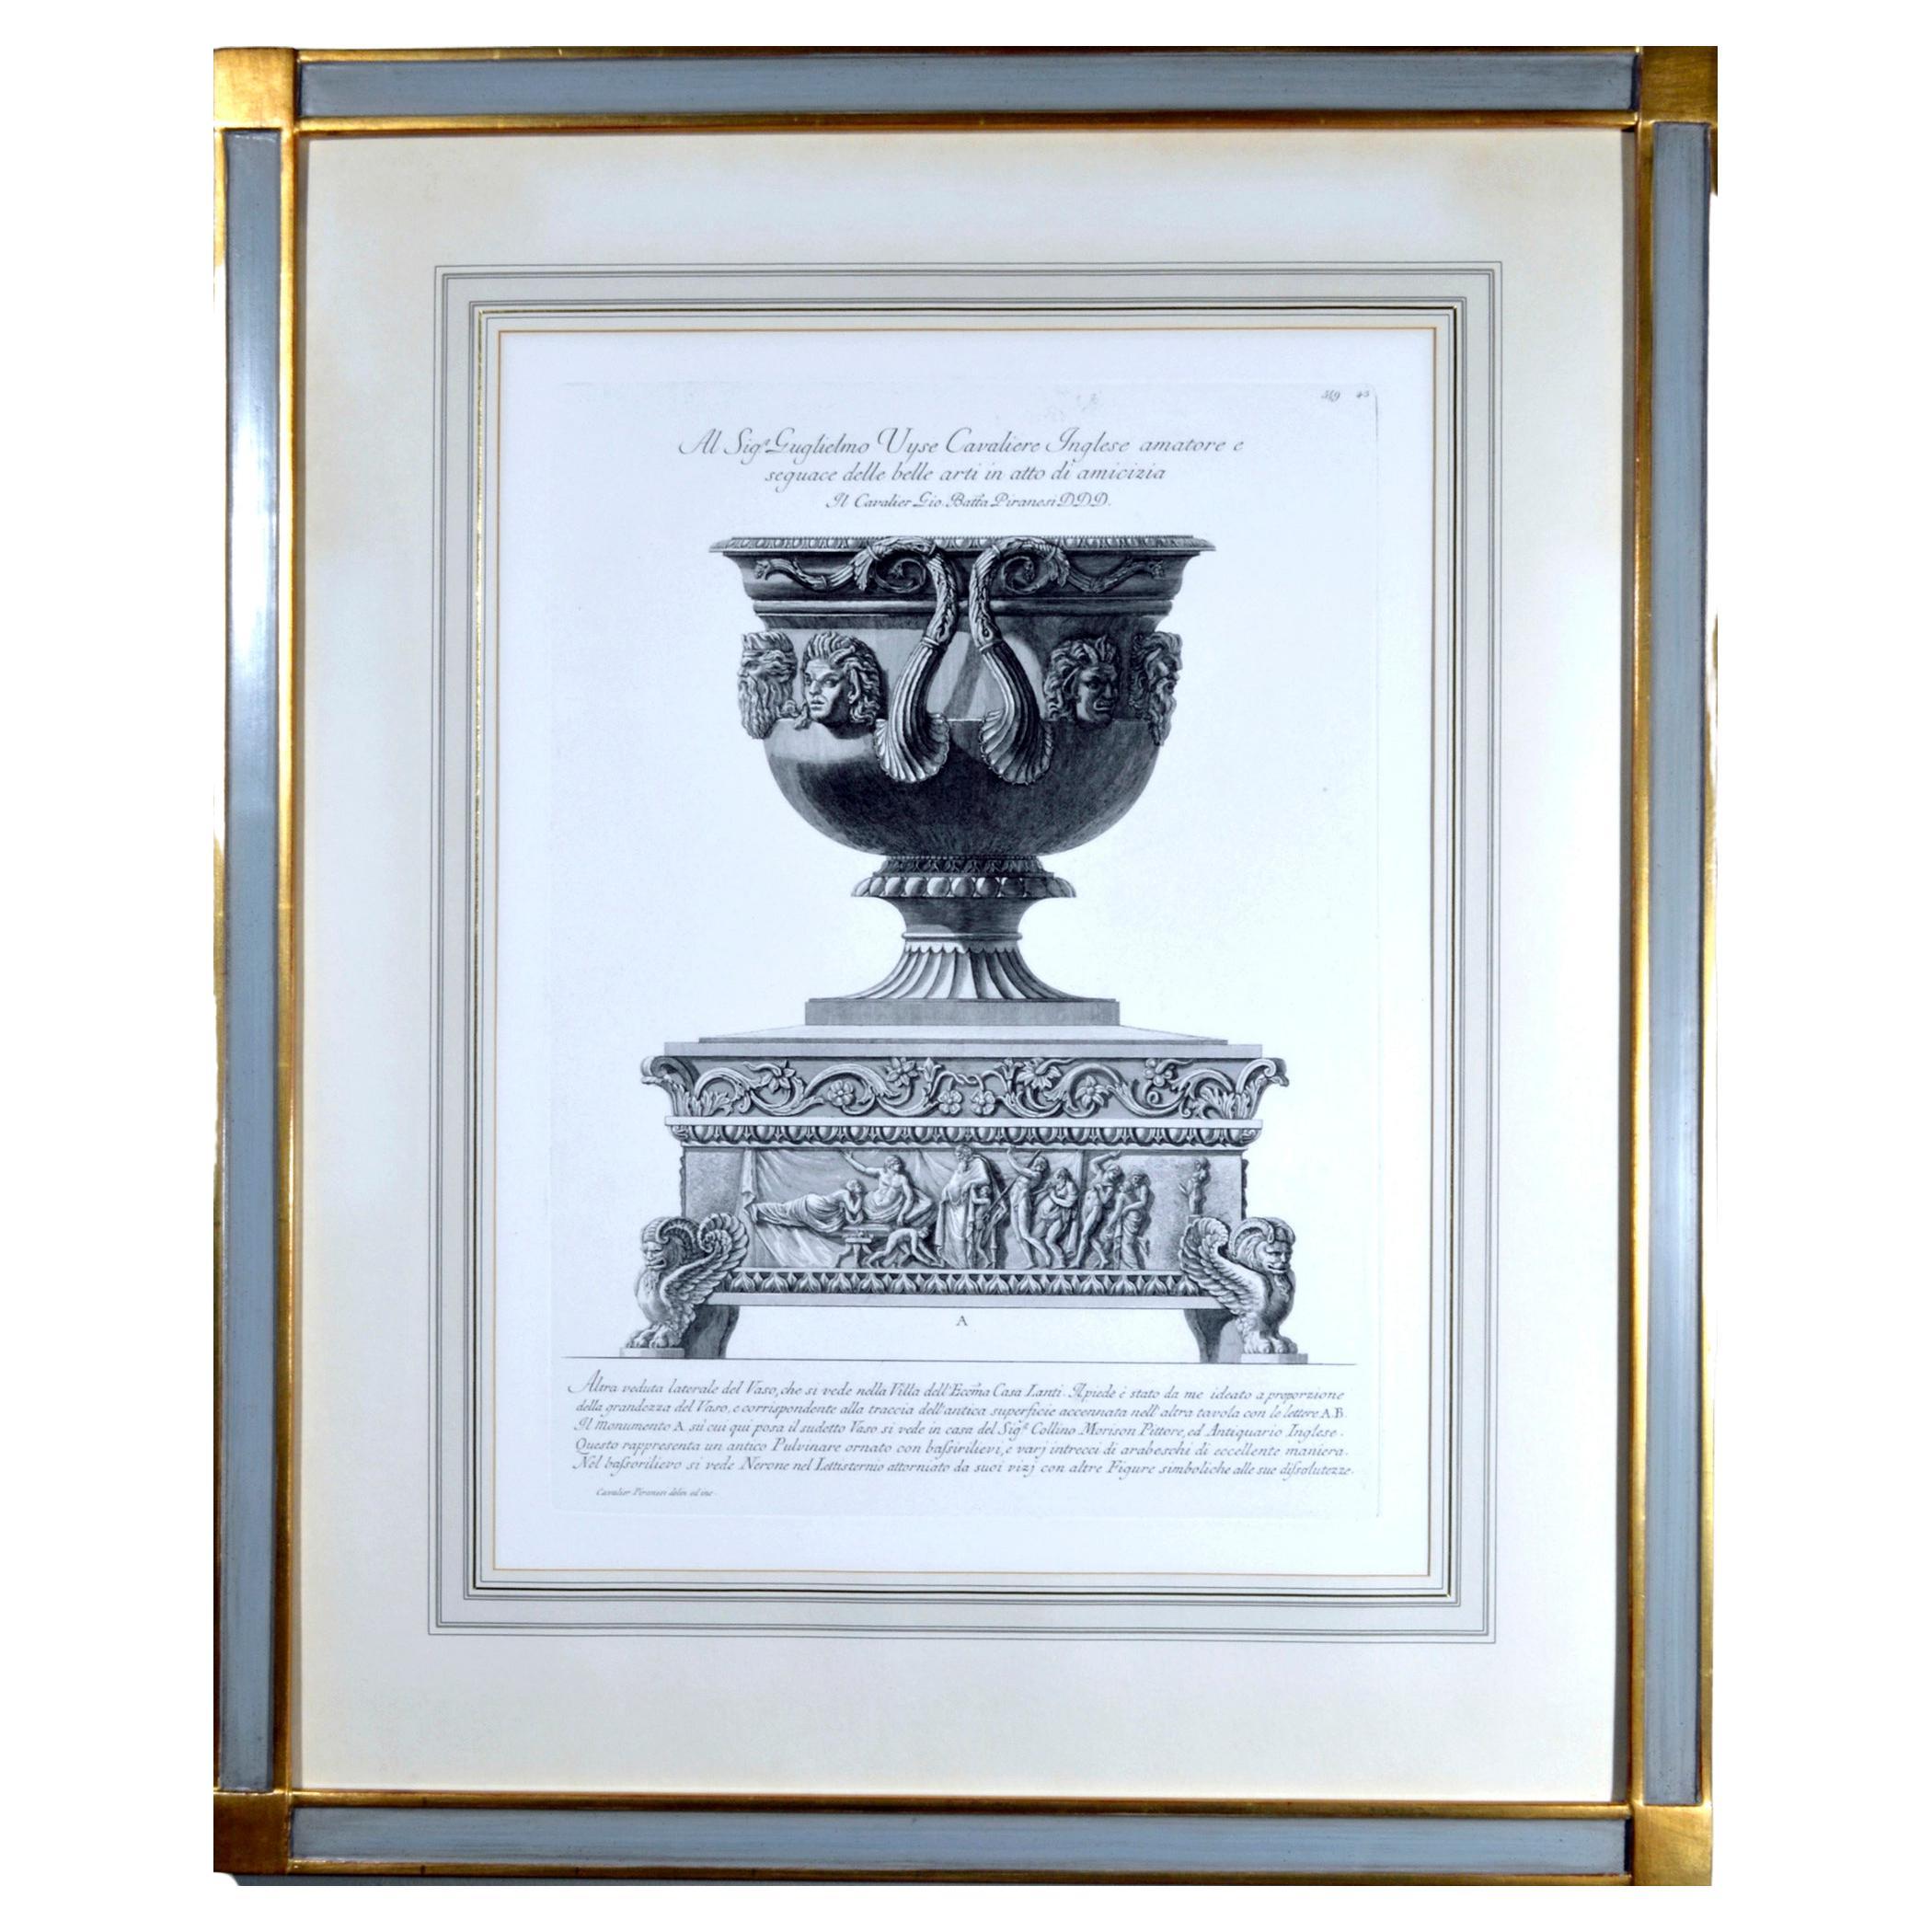 Framed Etching of a Massive Urn by Piranesi, Plate 549